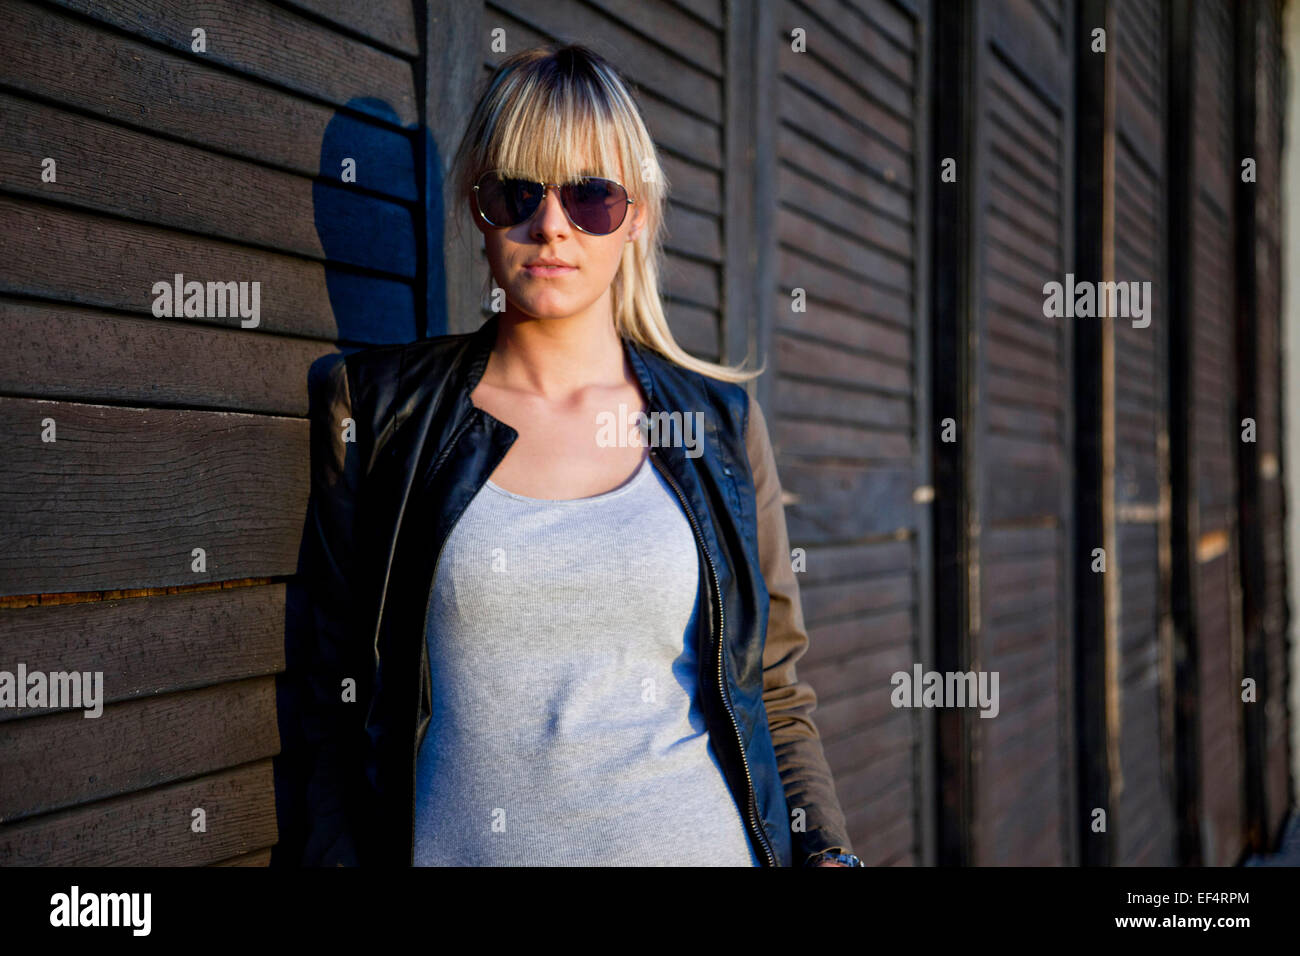 Portrait of young woman with sunglasses Stock Photo